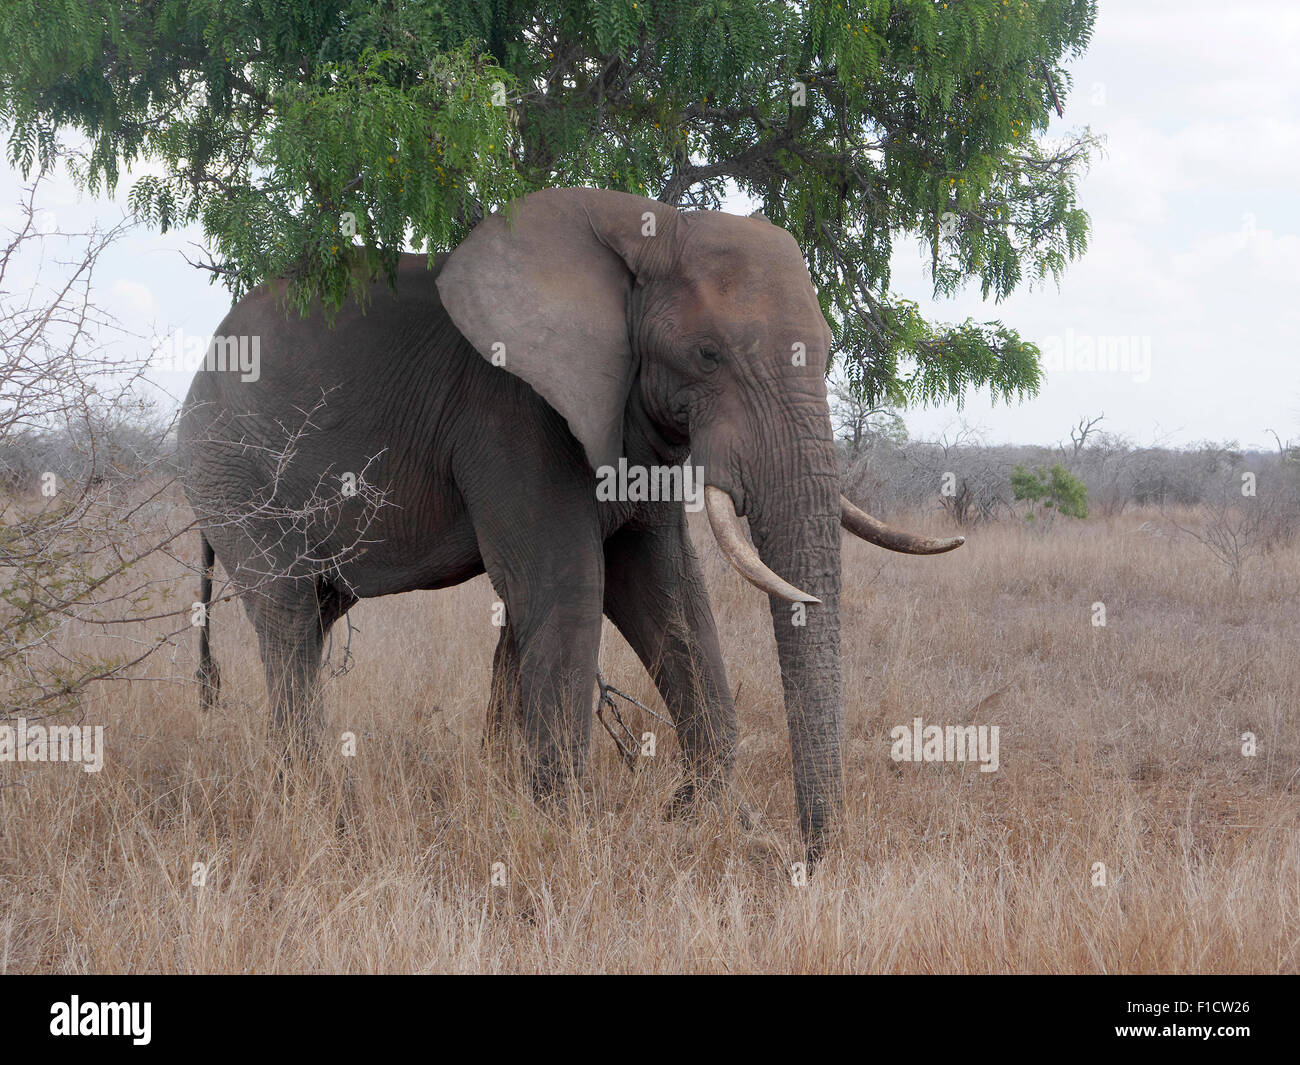 African elephant, Loxodonta africana, South Africa, August 2015 Stock Photo